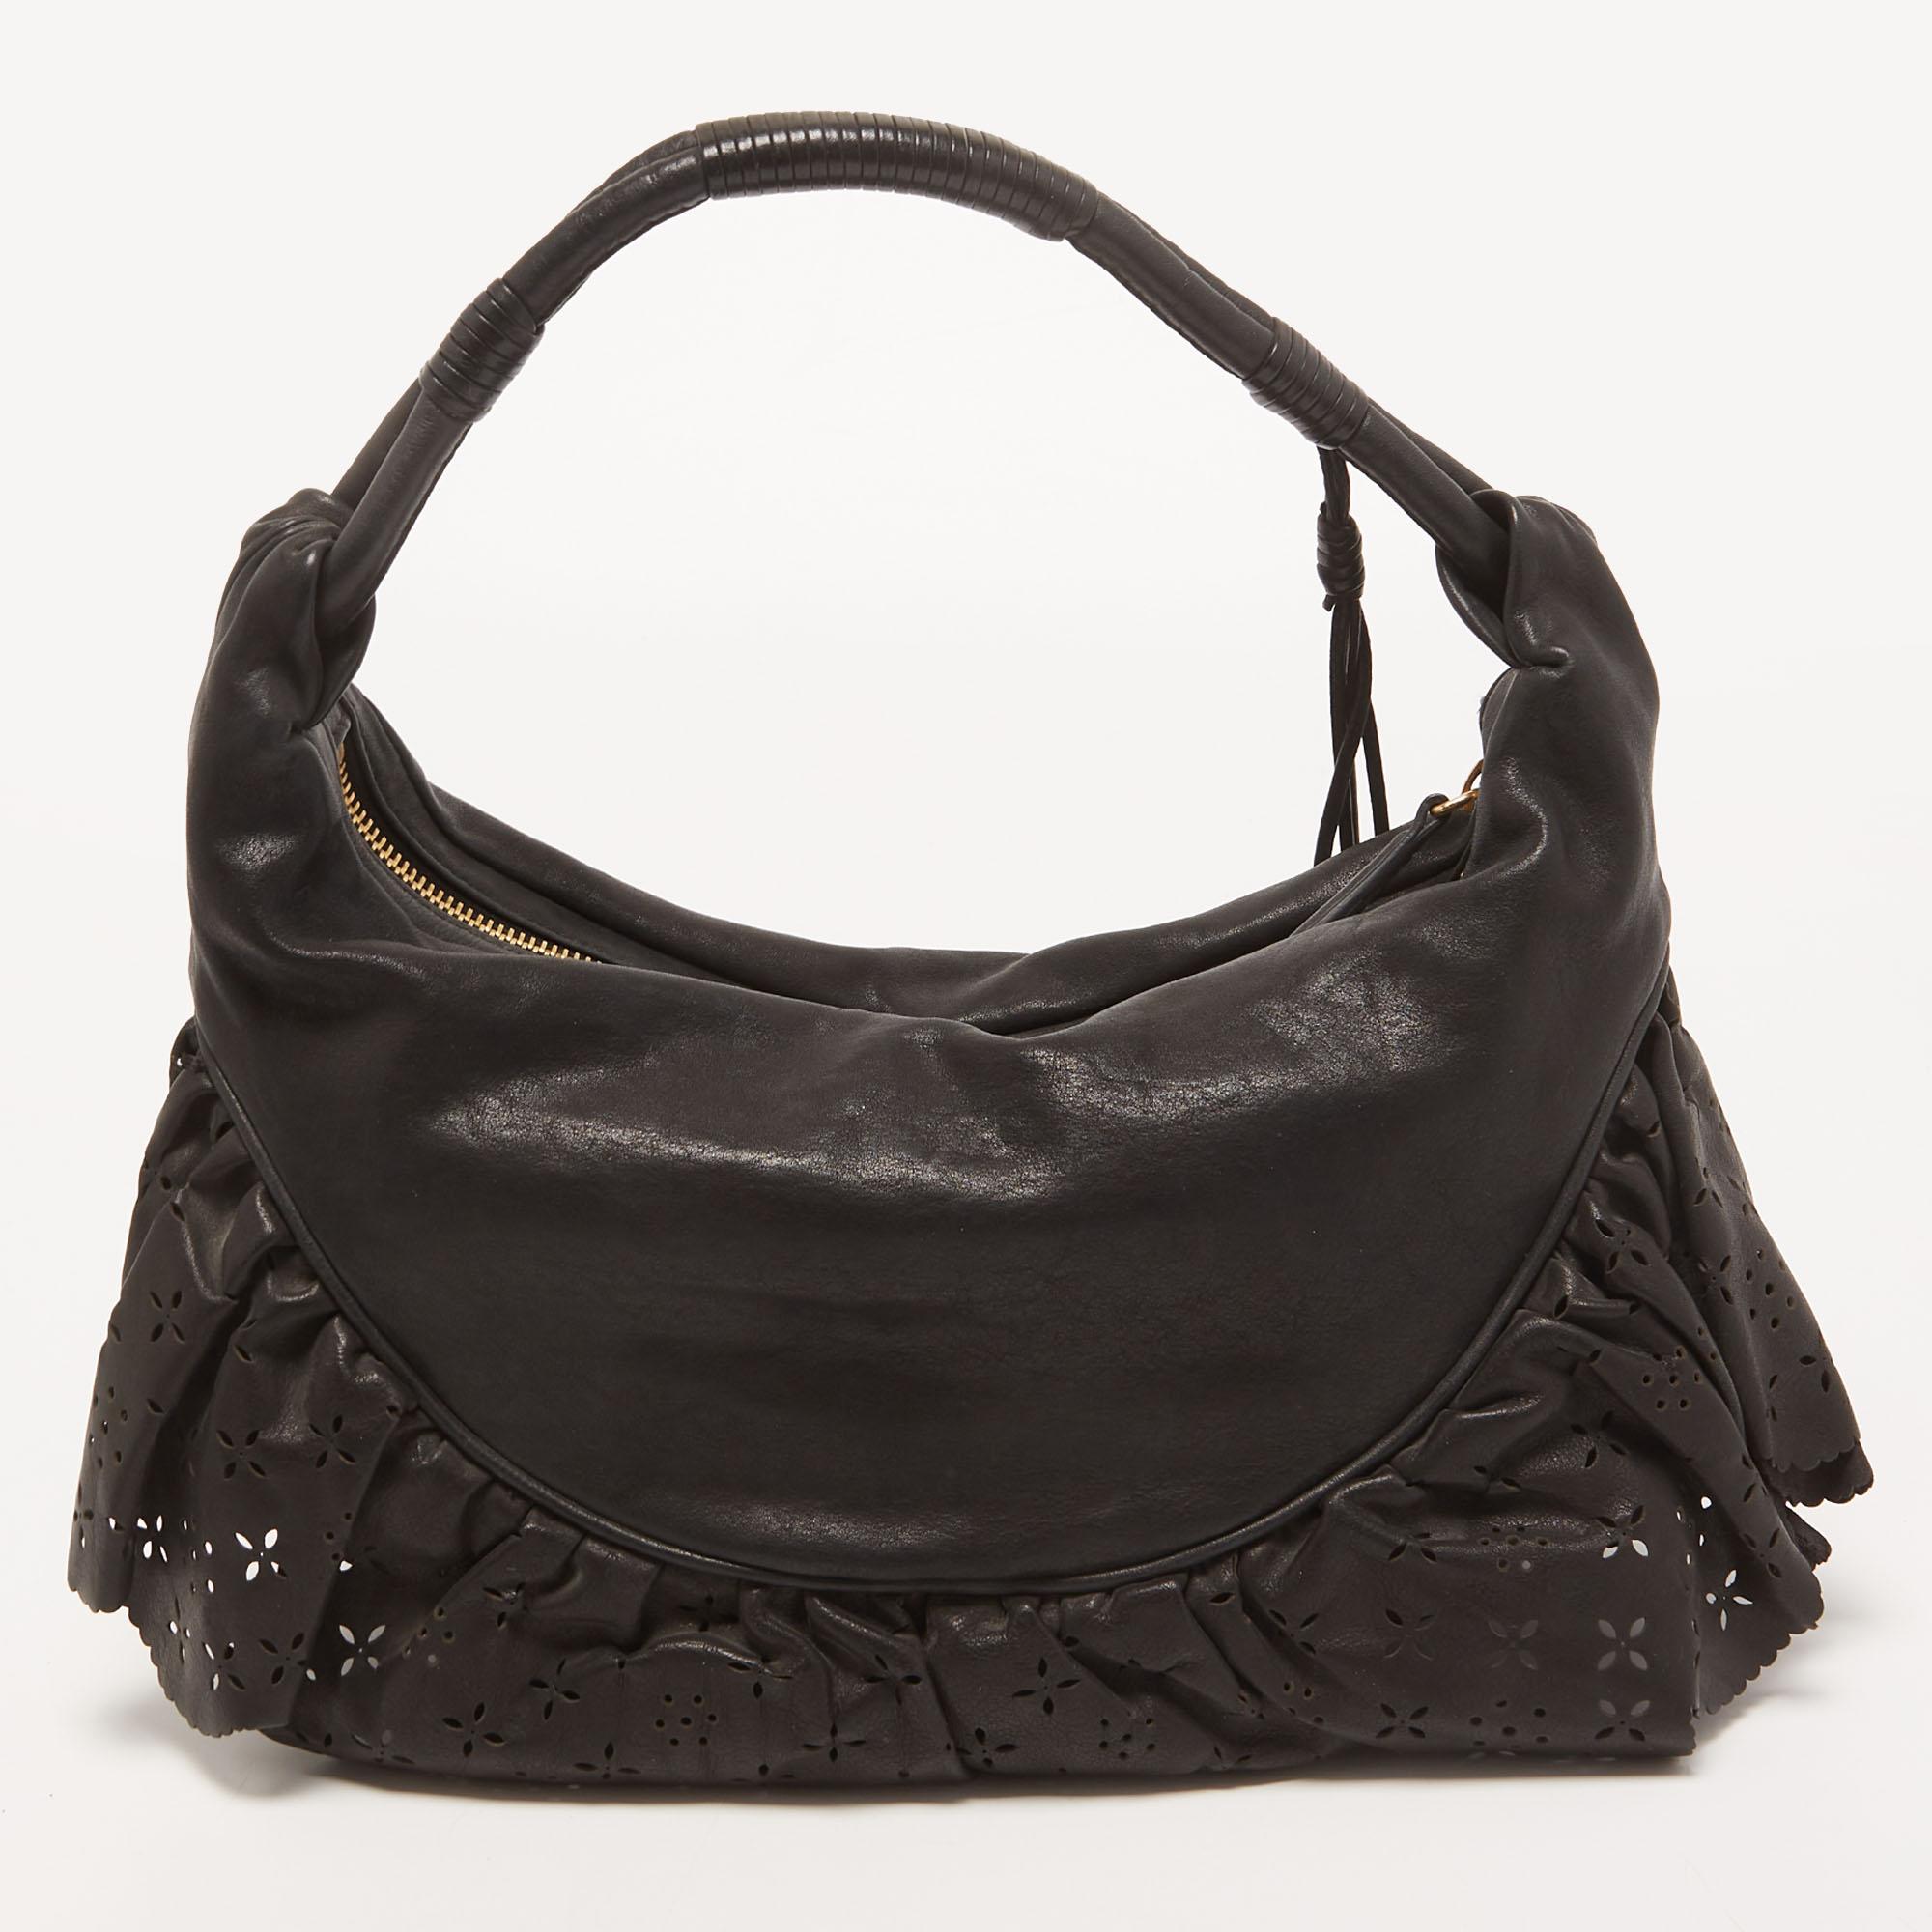 Charm your crowd with every swing of this Dior hobo. Crafted from leather, this black bag has lace-like ruffles and a top zipper which reveals a satin interior sized to carry your essentials. It is equipped with a top handle and styled with the